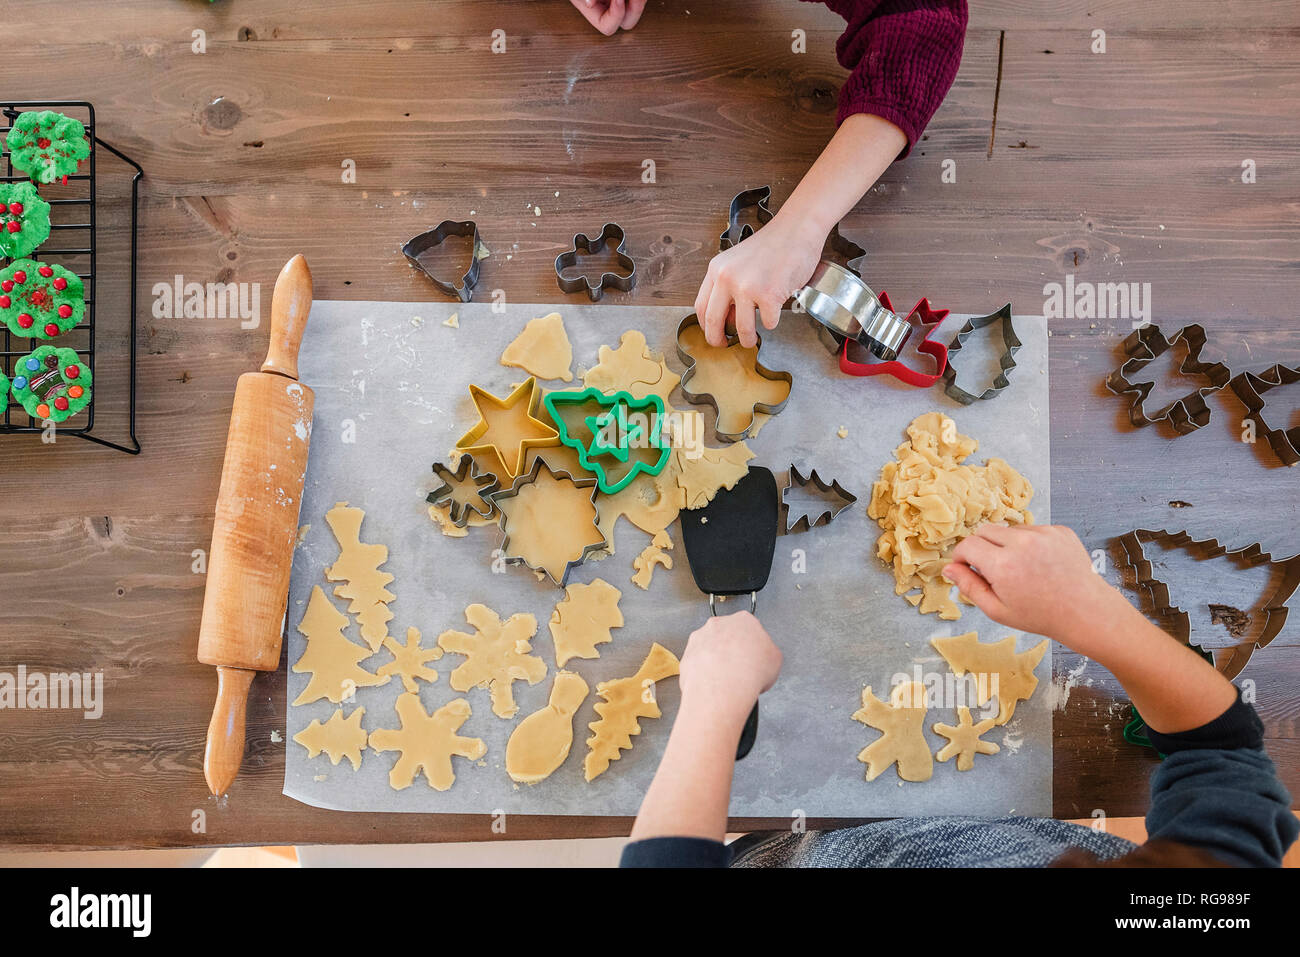 Overhead view of two children making Christmas cookies Stock Photo